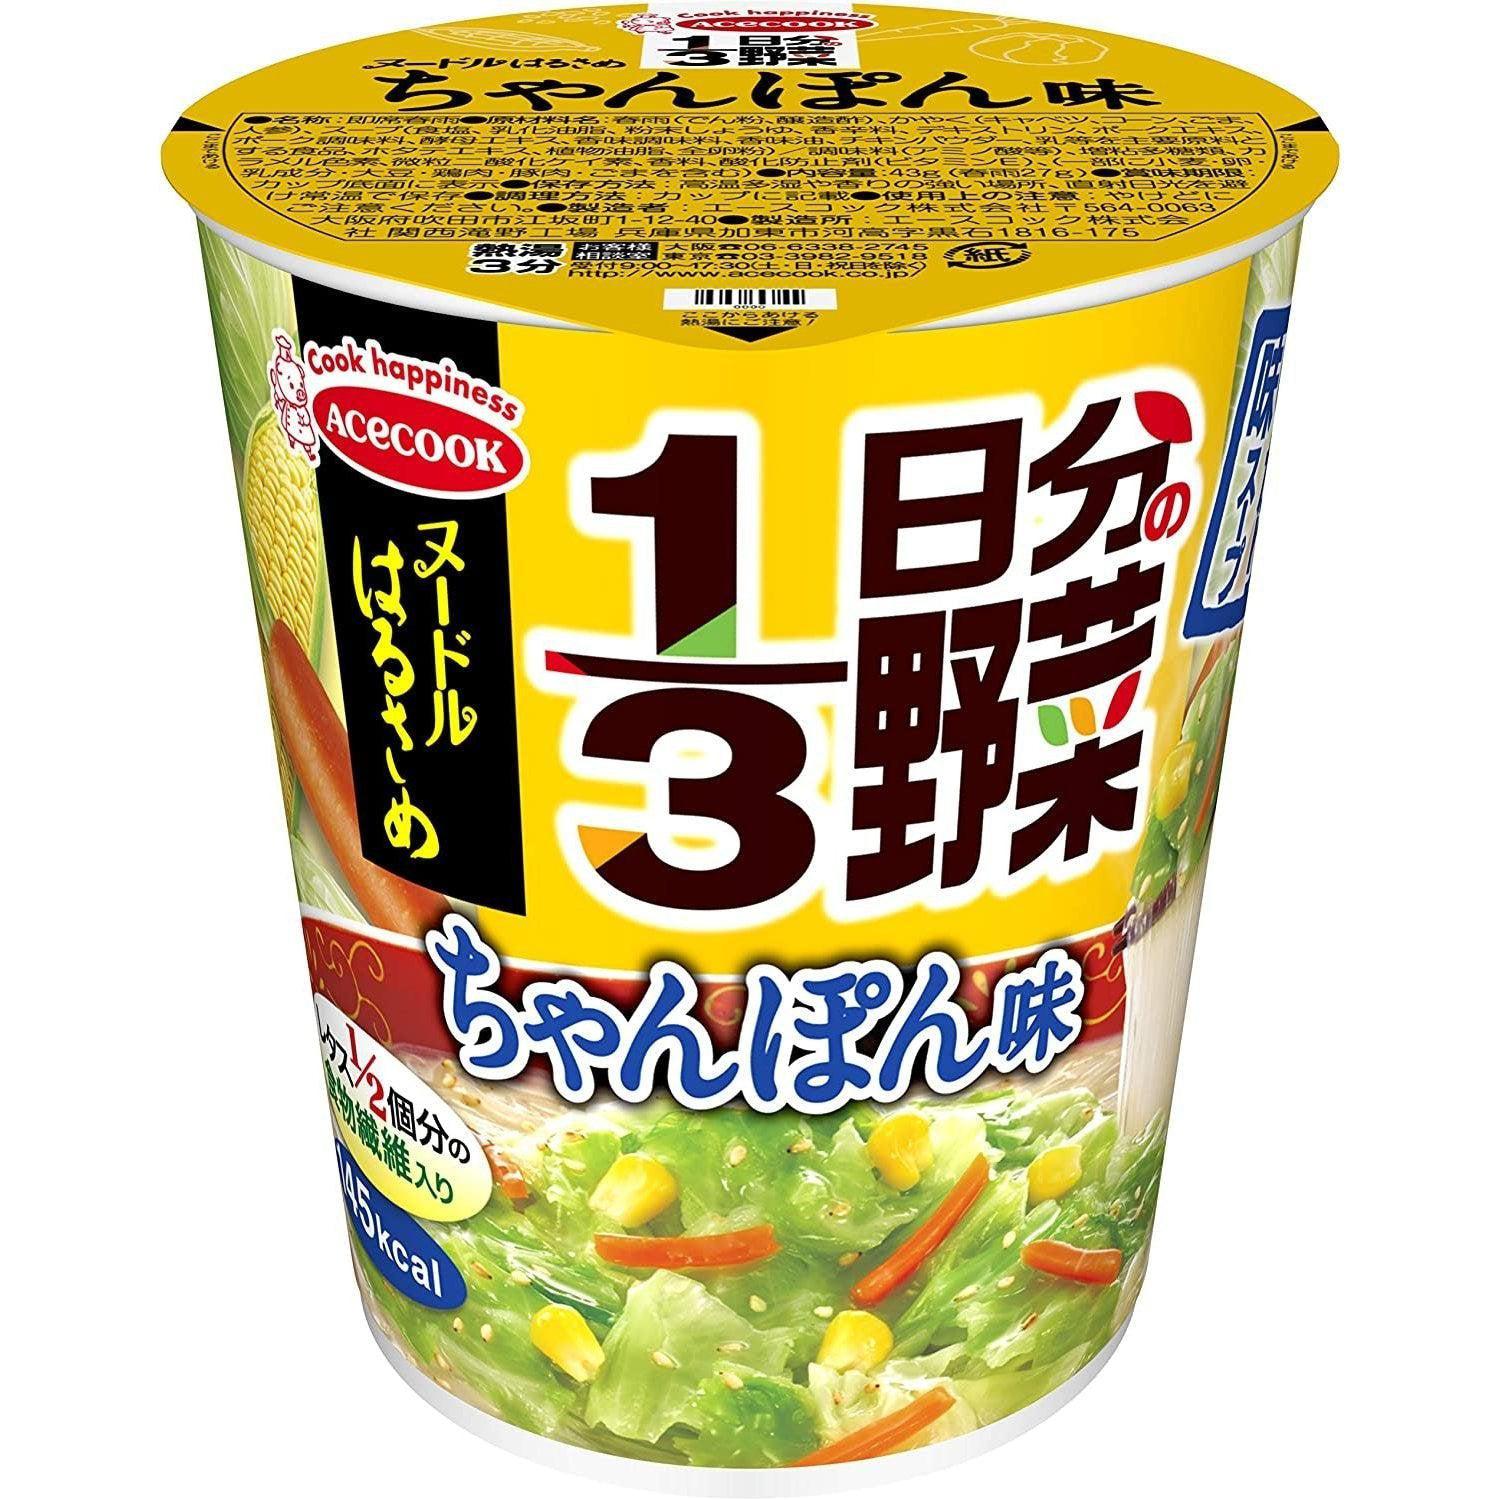 Acecook Instant Harusame Noodles Champon Flavor 43g (Pack of 6) - YOYO JAPAN